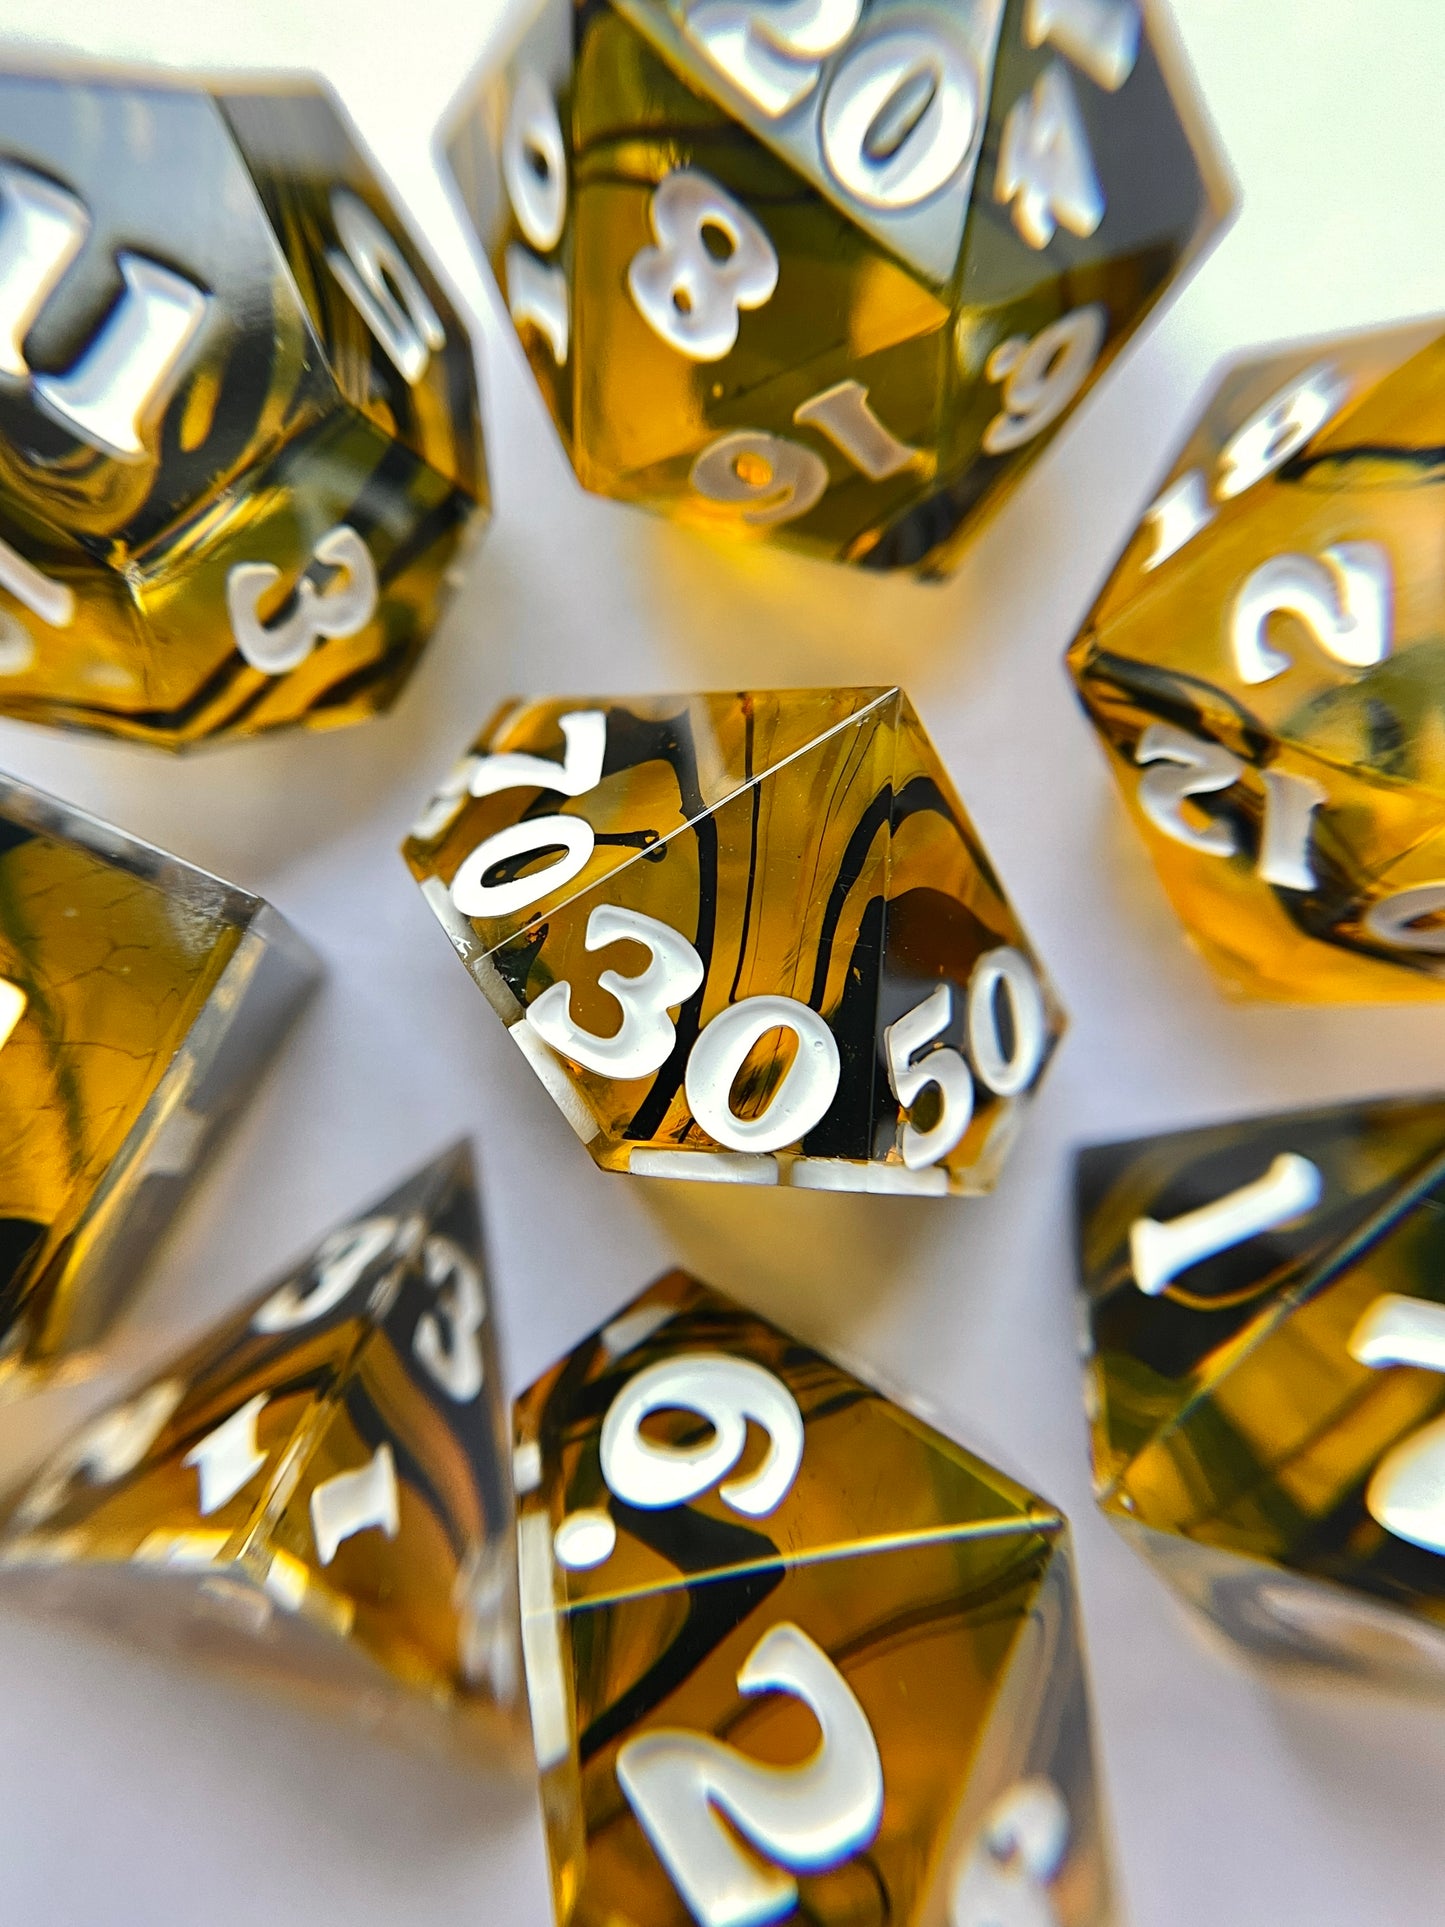 The Wailing – 7-piece Polyhedral Dice Set